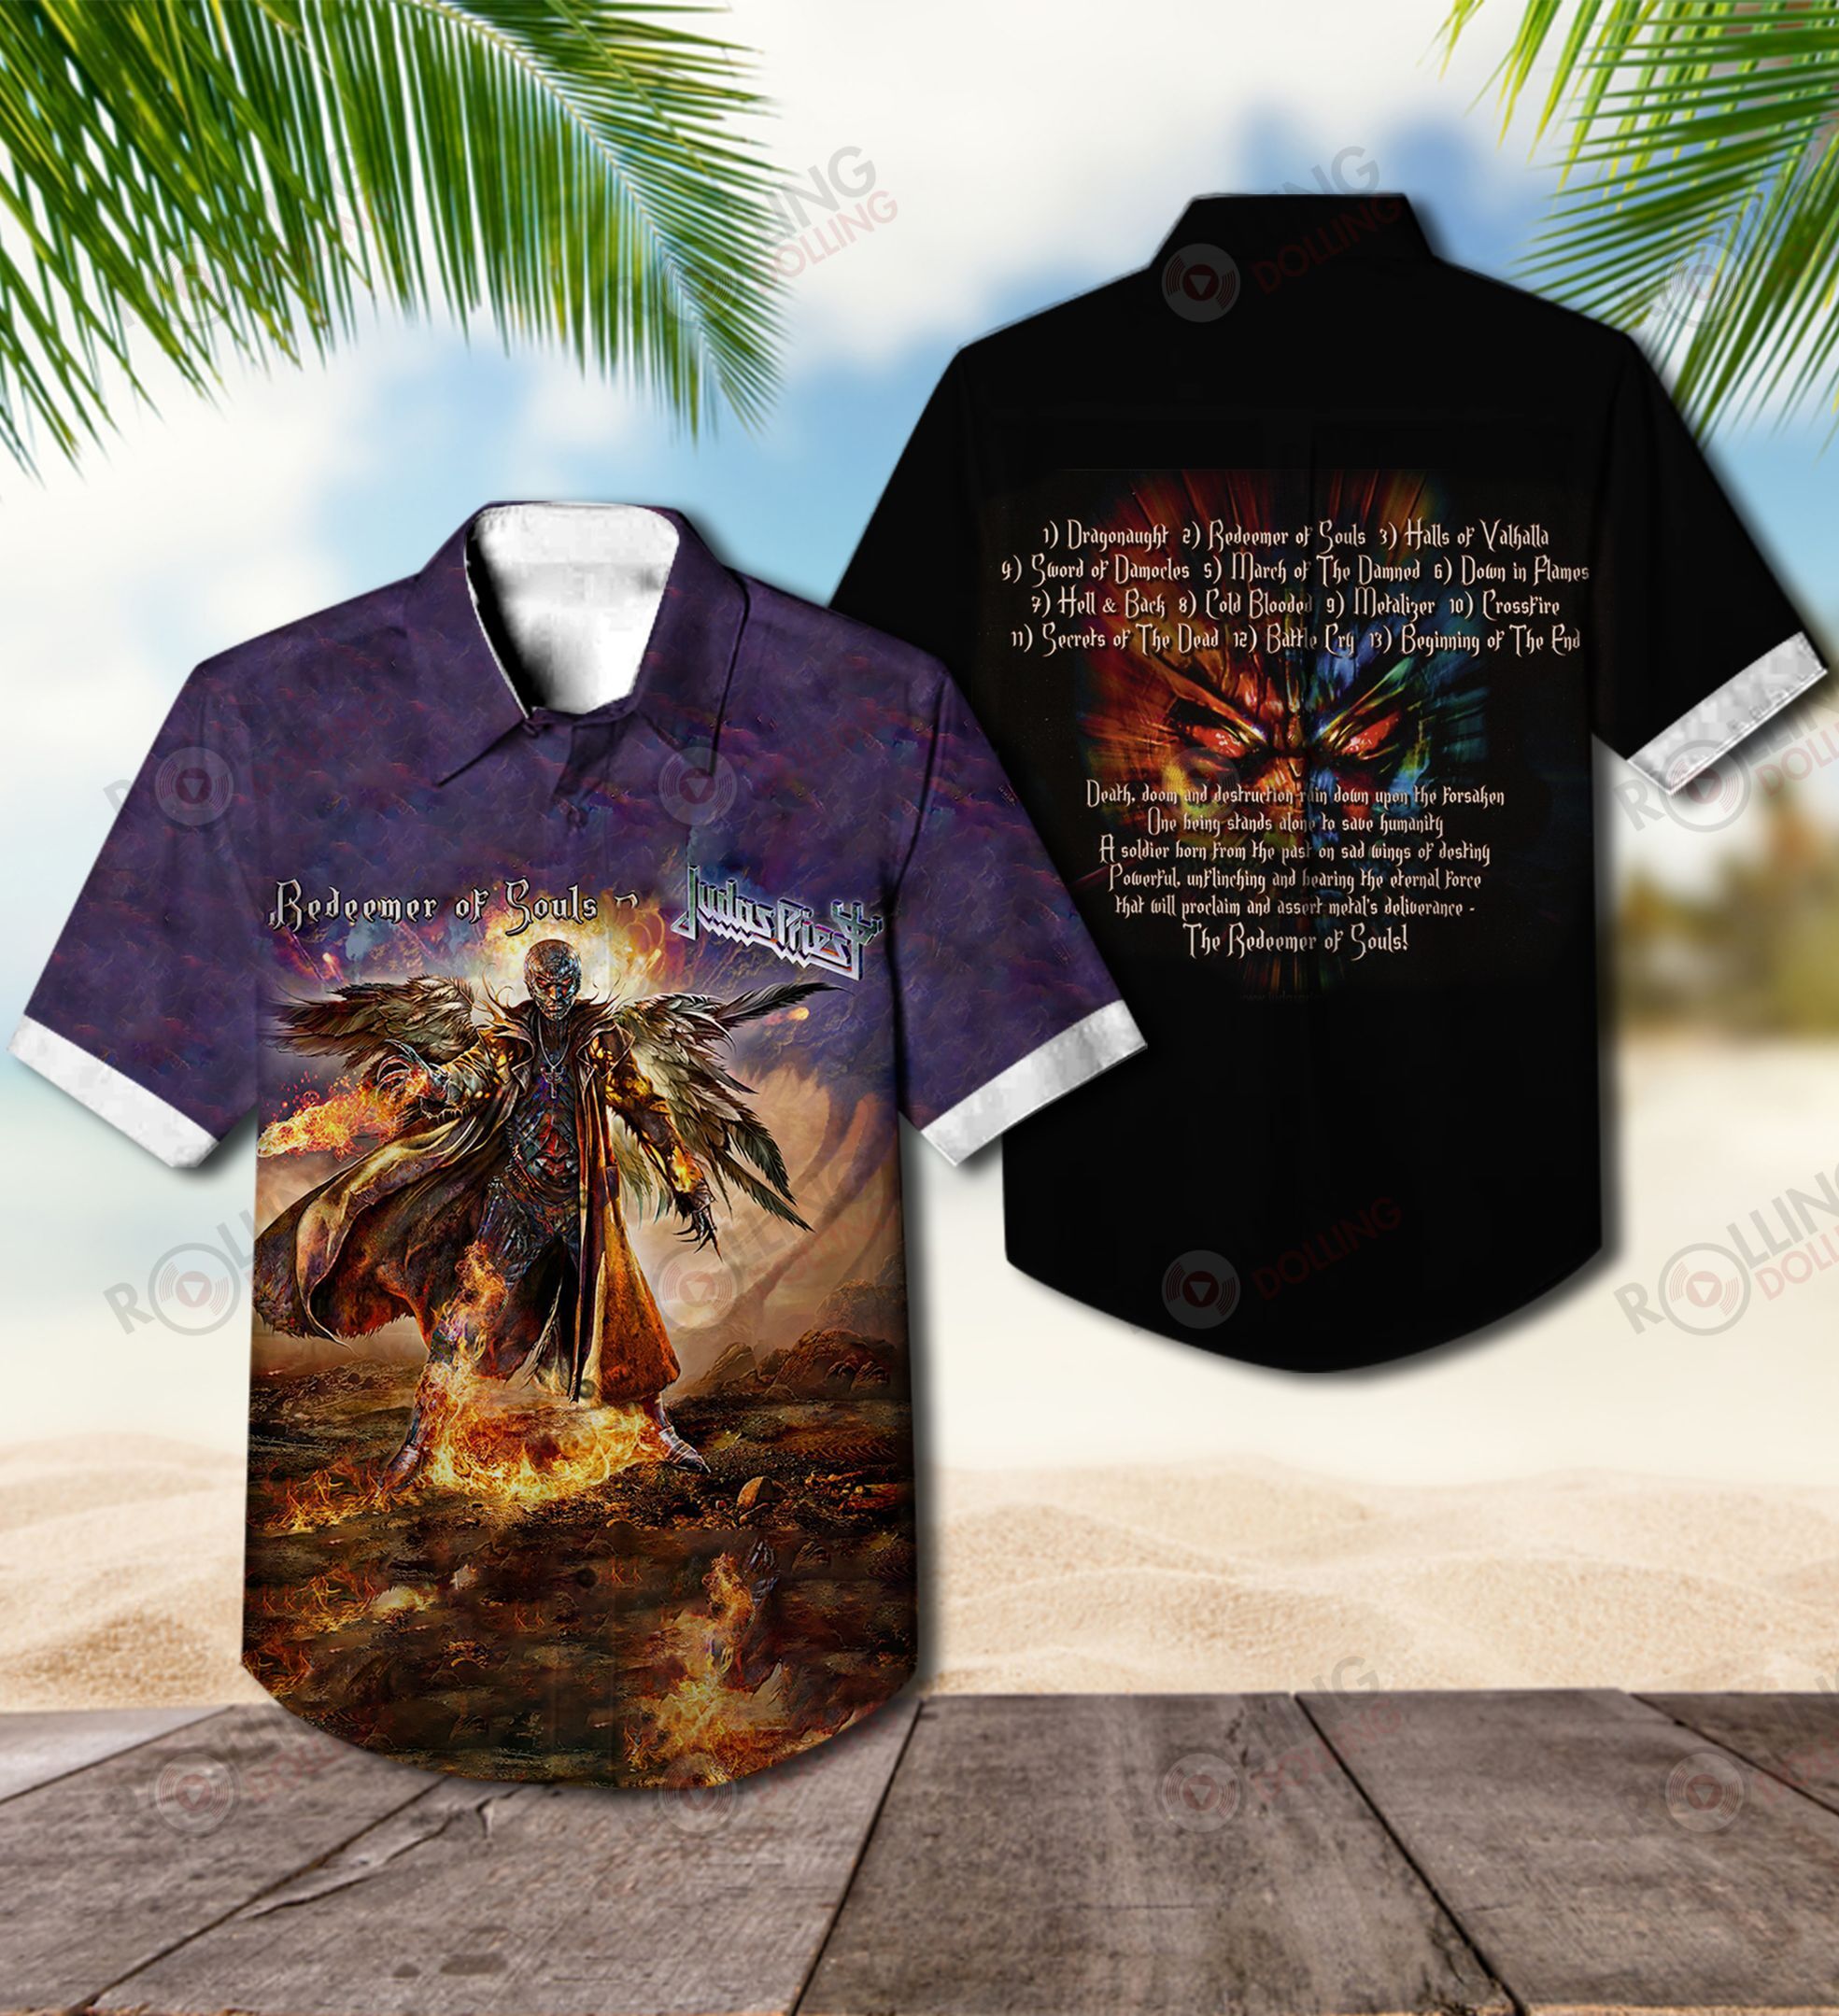 Check out these top 100+ Hawaiian shirt so cool for rock fans 257